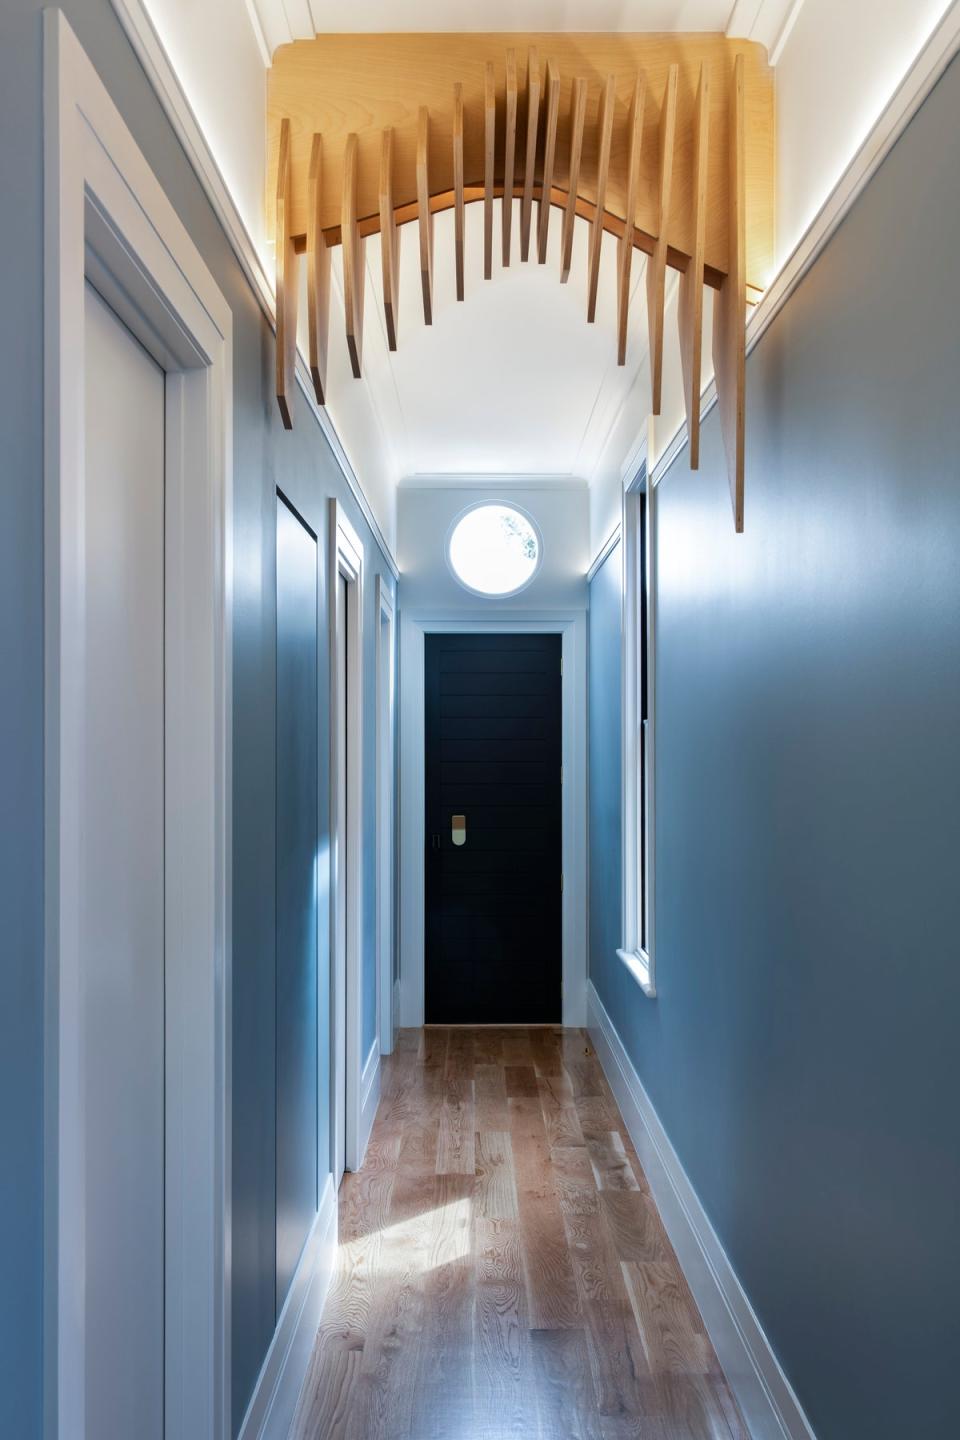 AFTER: The hallway is painted a light blue that continues into a front bedroom—this is where Nathan and Iman’s families will stay when they come to visit.